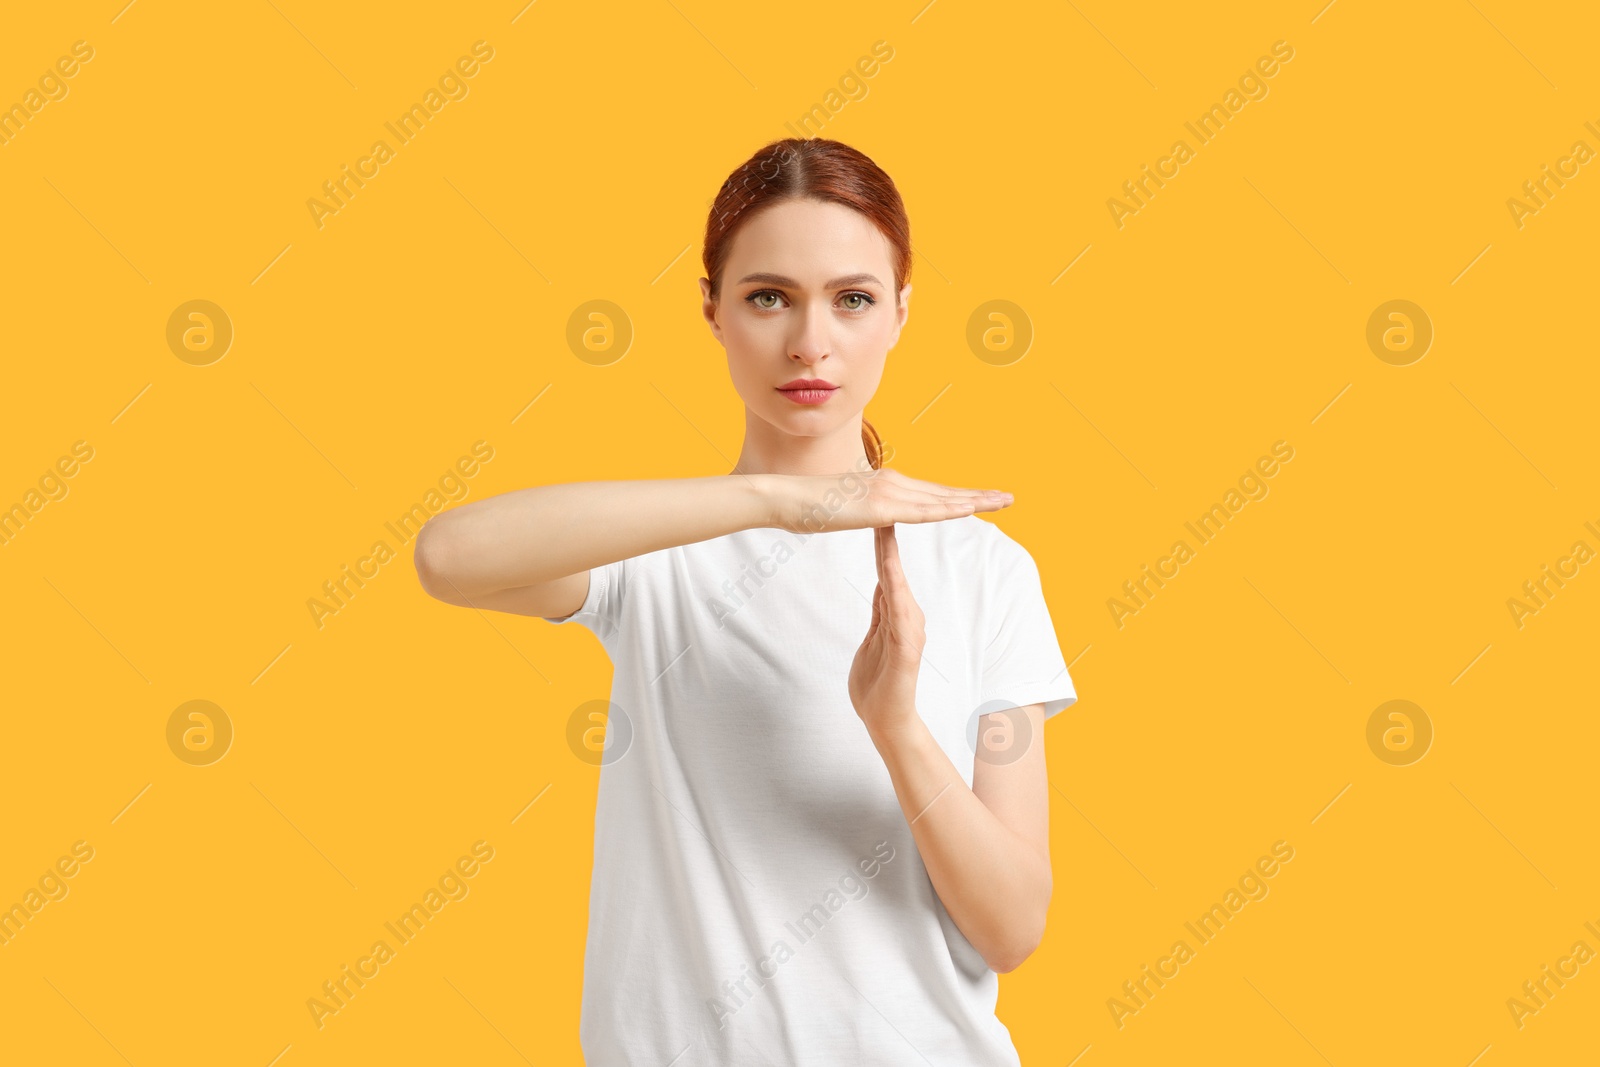 Photo of Woman showing time out gesture on yellow background